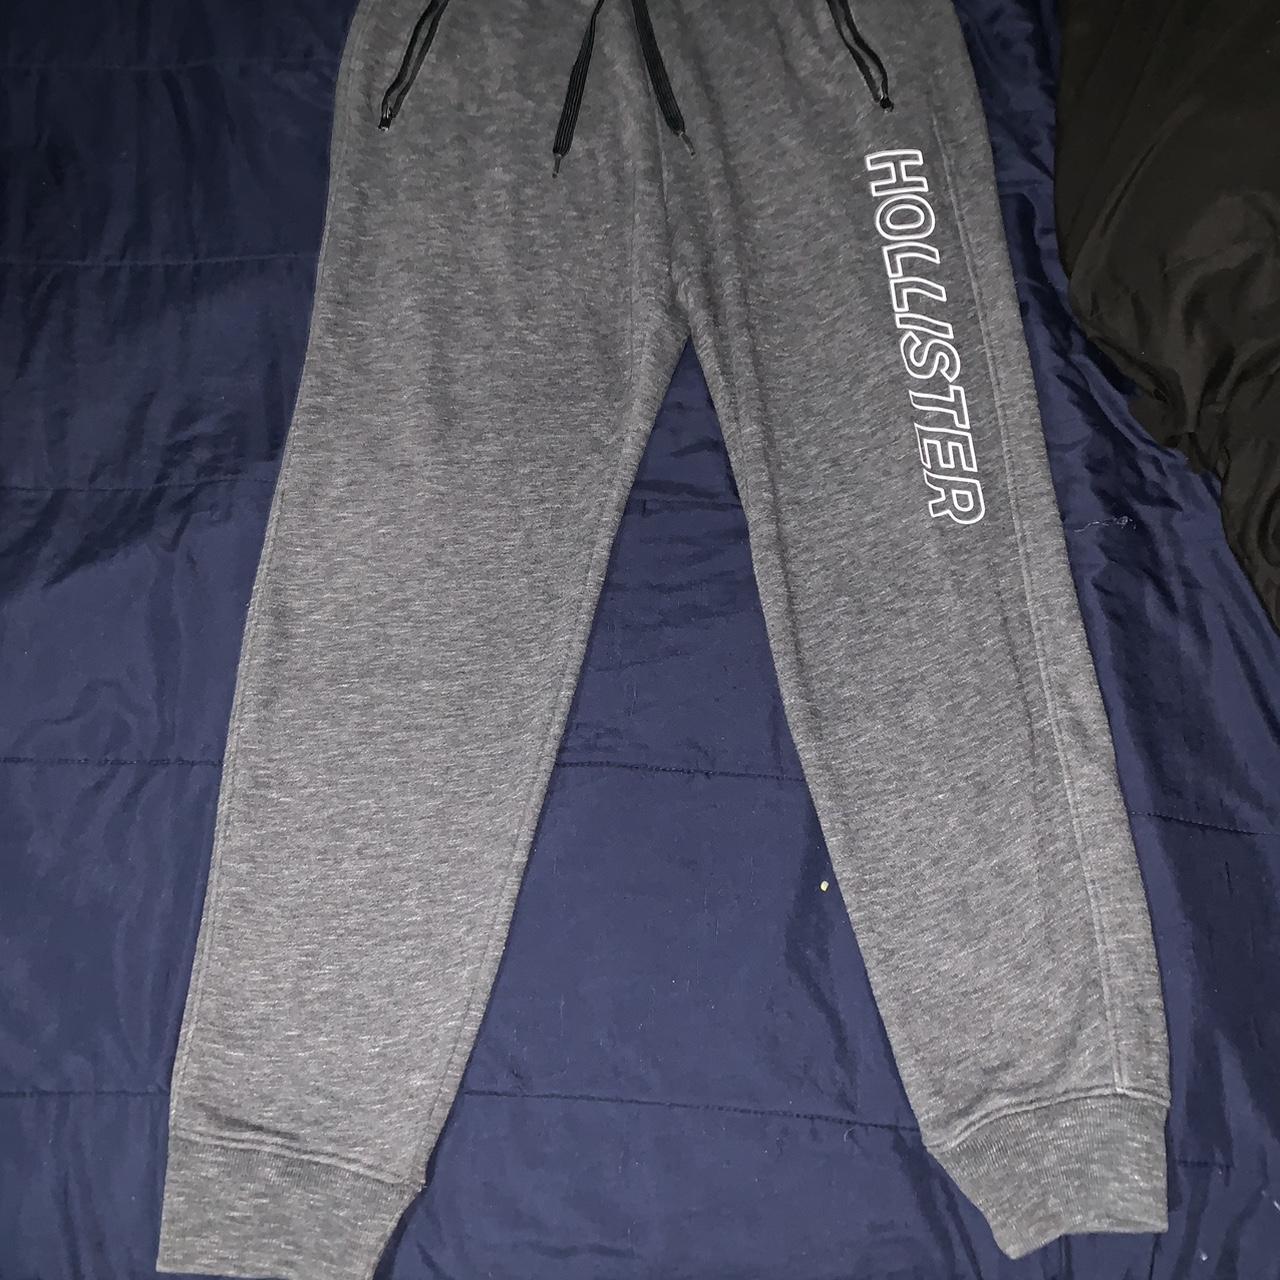 #Hollister sweatpants. Lightly worn and very